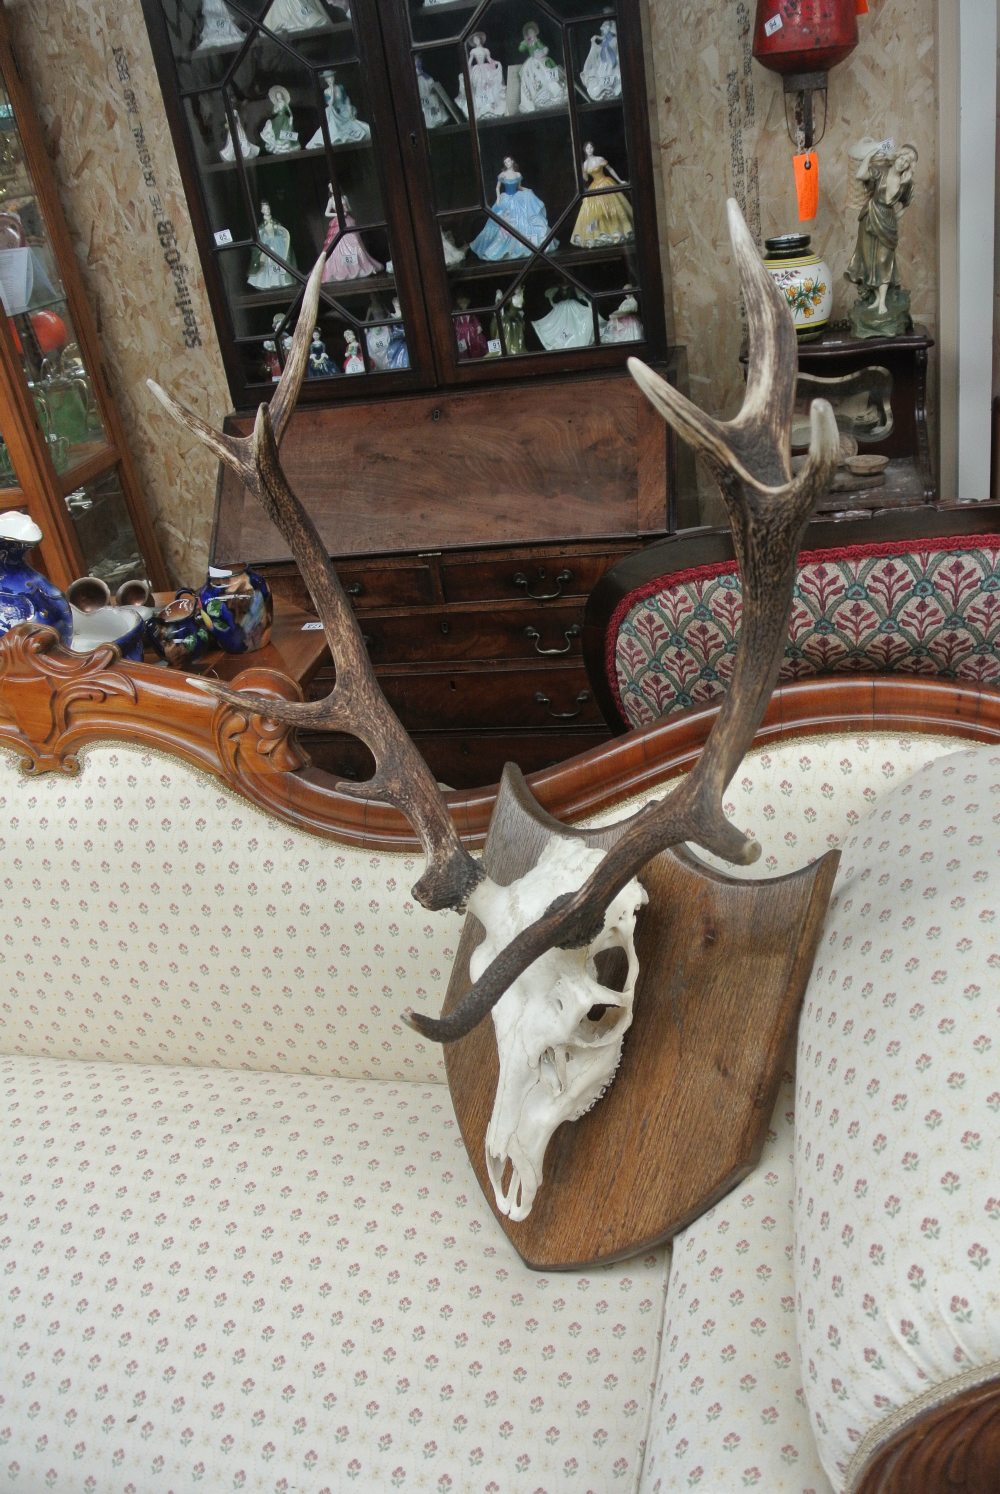 COLLECTABLES - A large taxidermy set of red deer antlers with skull - Image 2 of 2